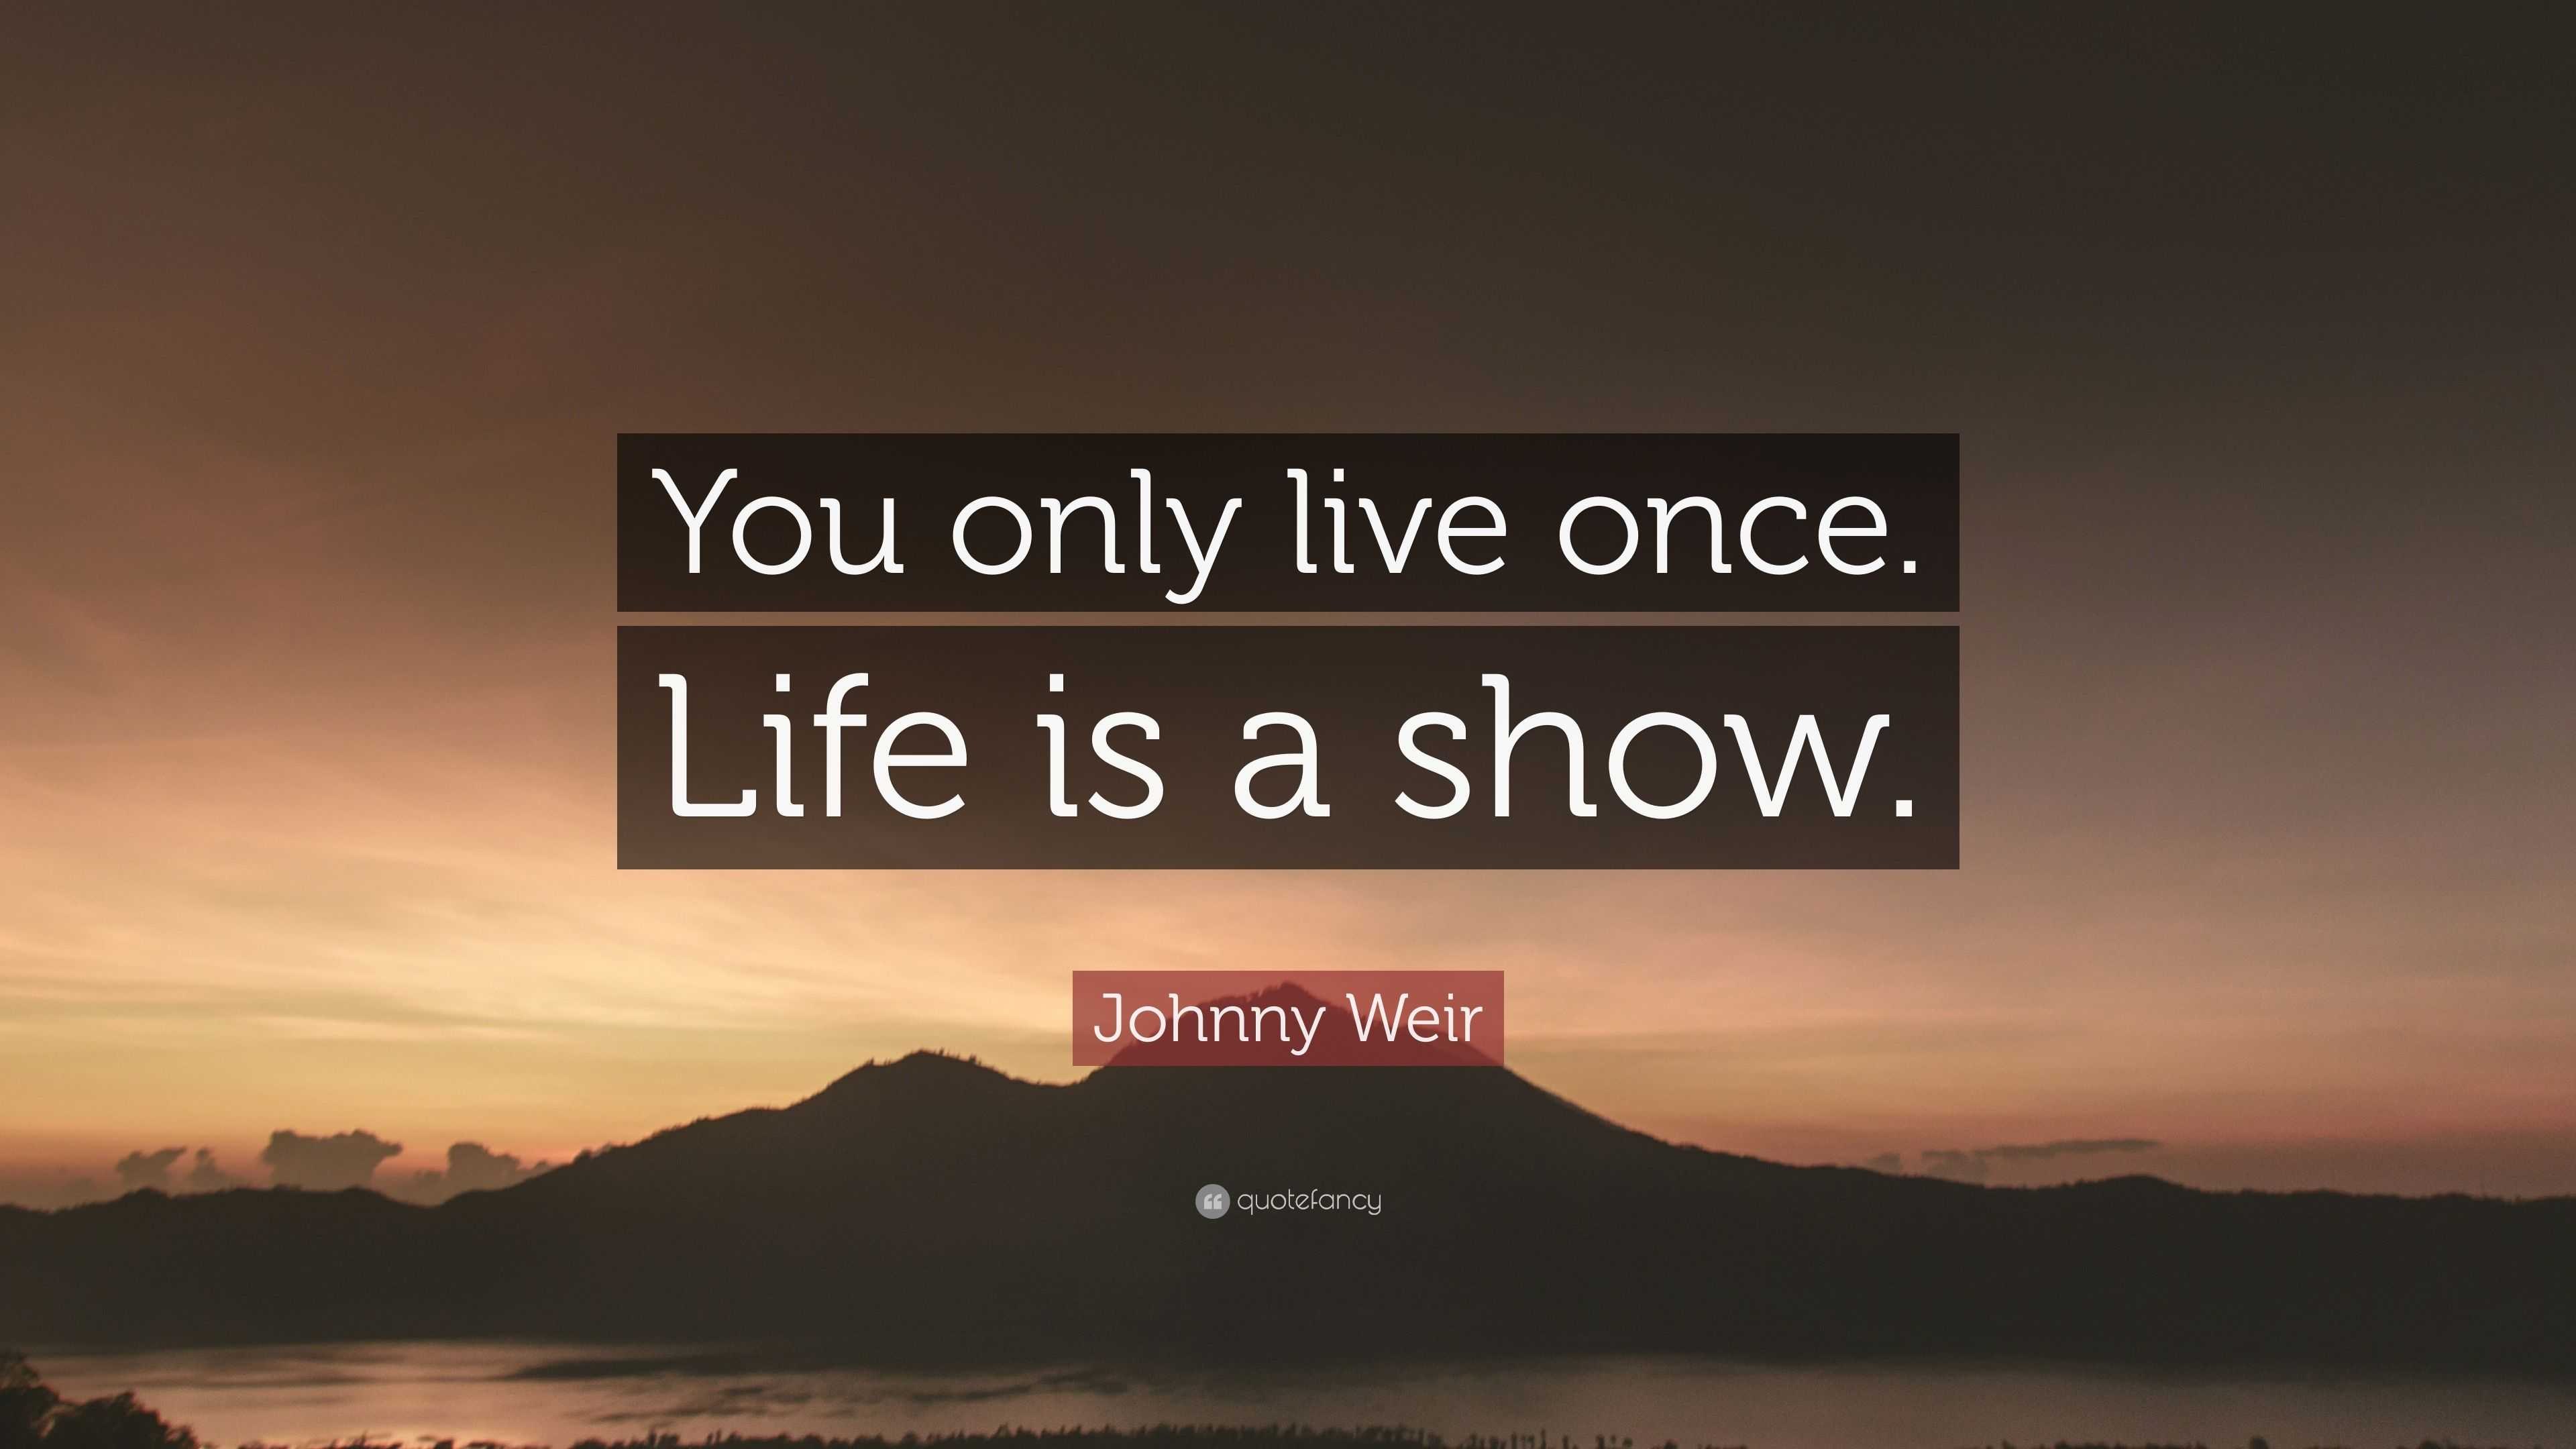 Johnny Weir Quote: “You only live once. Life is a show.”